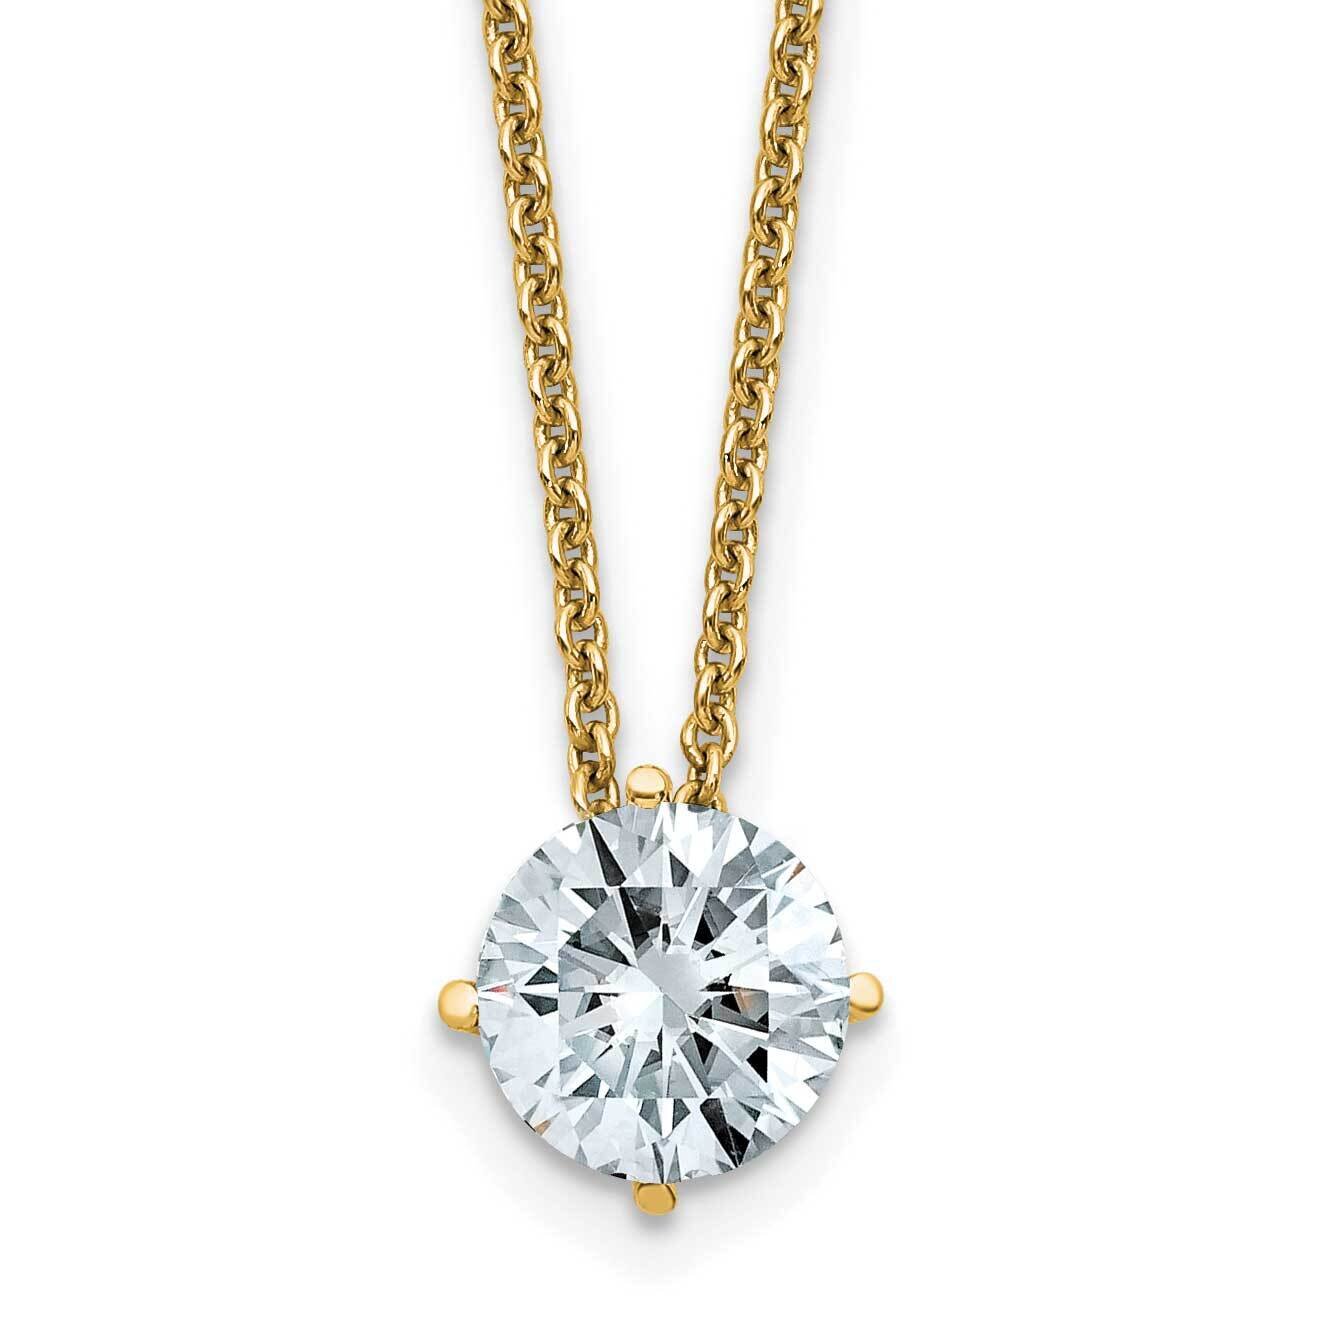 1ct. 6.5mm Round D E F Pure Light Moissanite Solitaire Necklace 14k Gold YG113-21MP